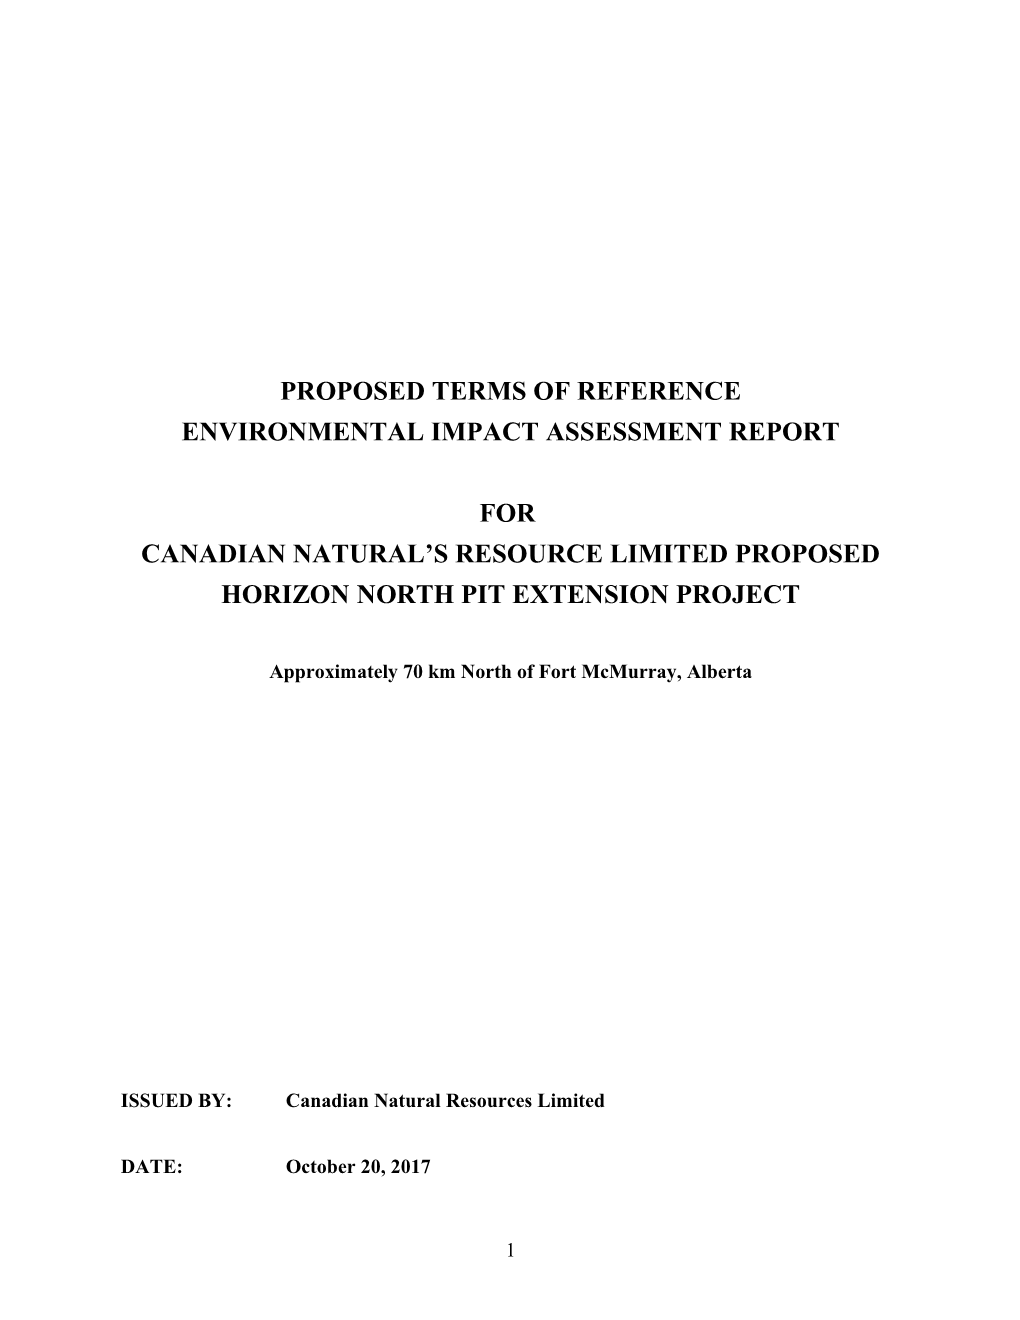 Proposed Terms of Reference Environmental Impact Assessment Report for Canadian Natural